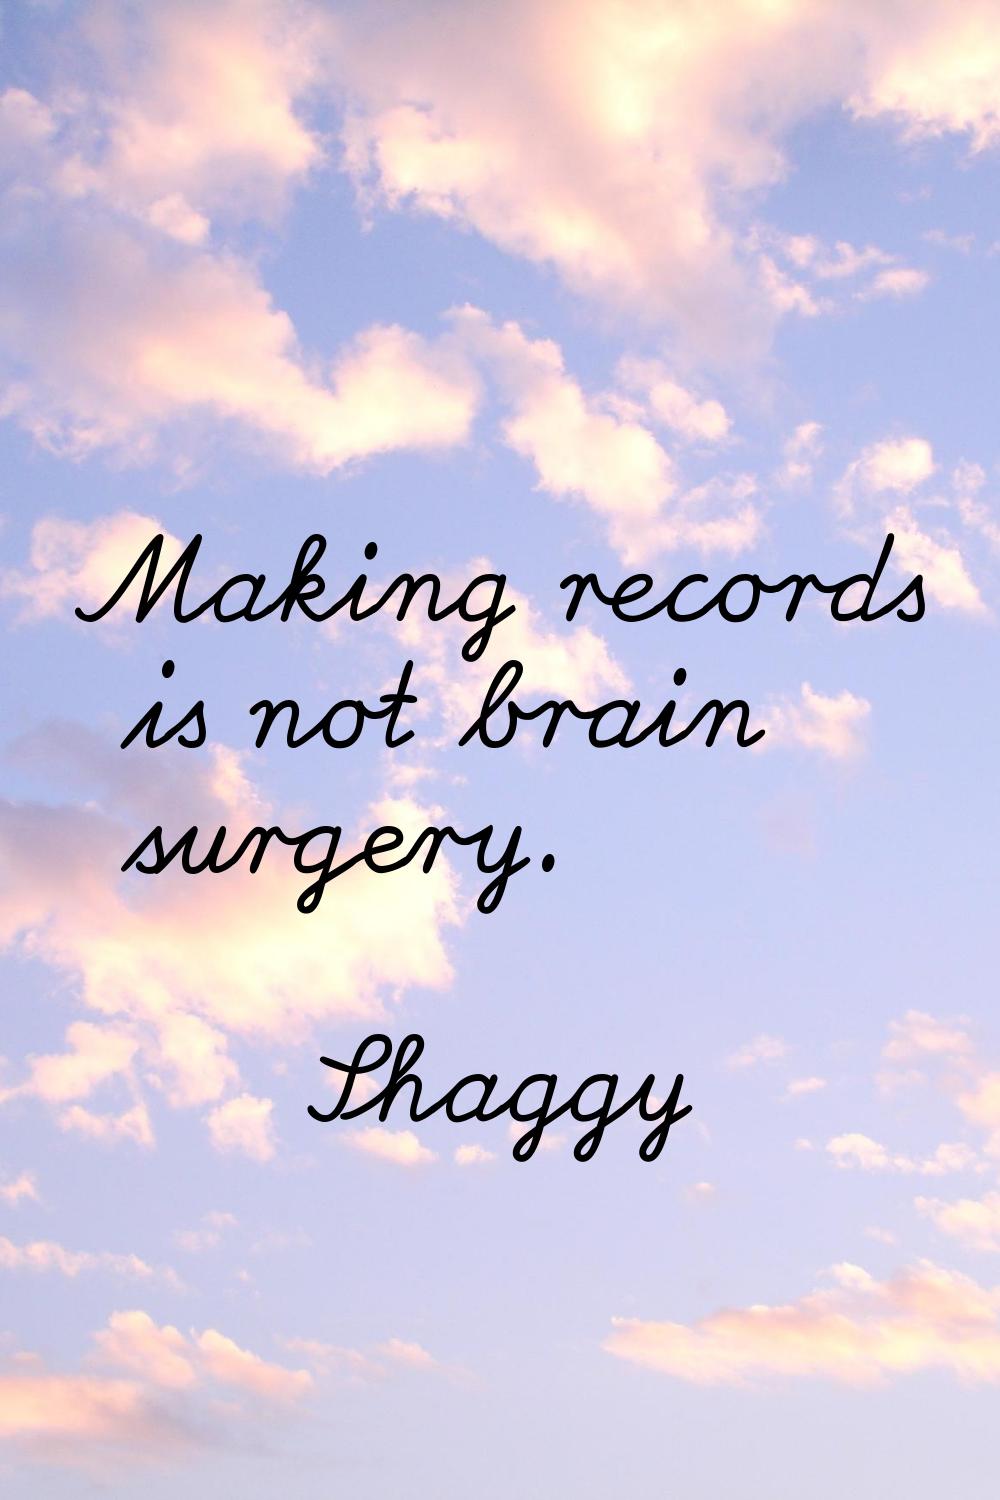 Making records is not brain surgery.